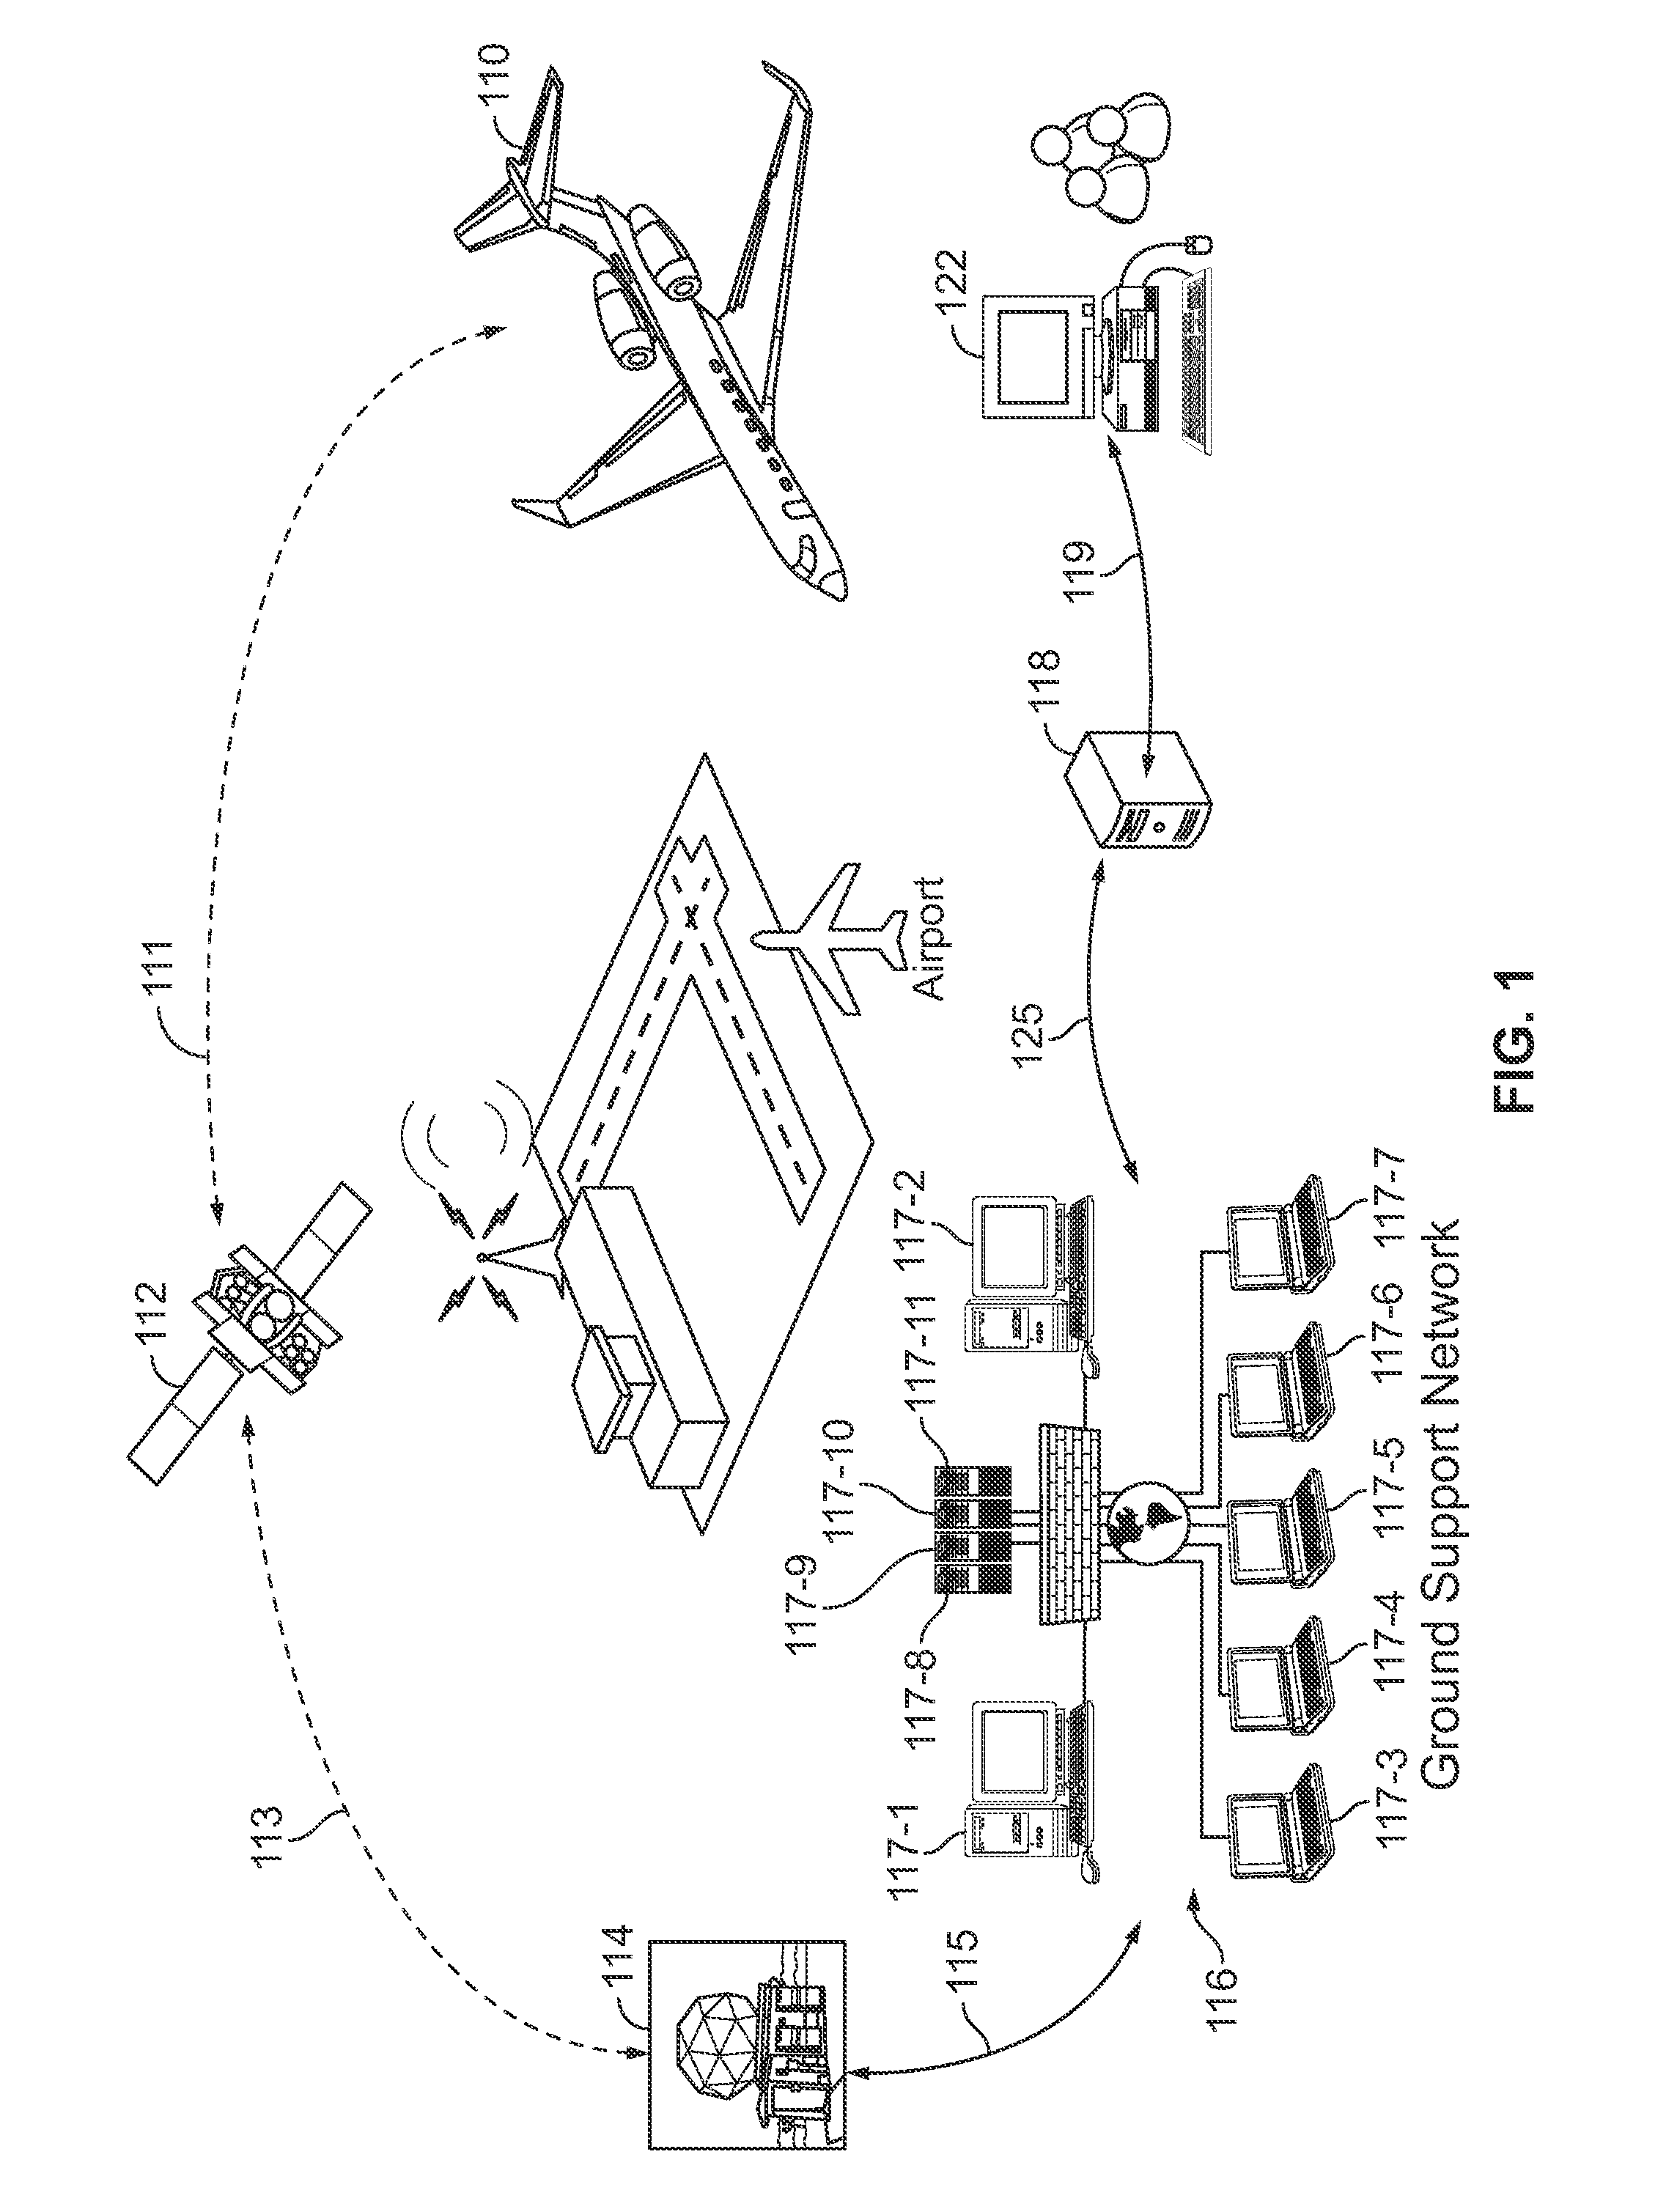 Methods and systems for requesting and retrieving aircraft data during flight of an aircraft